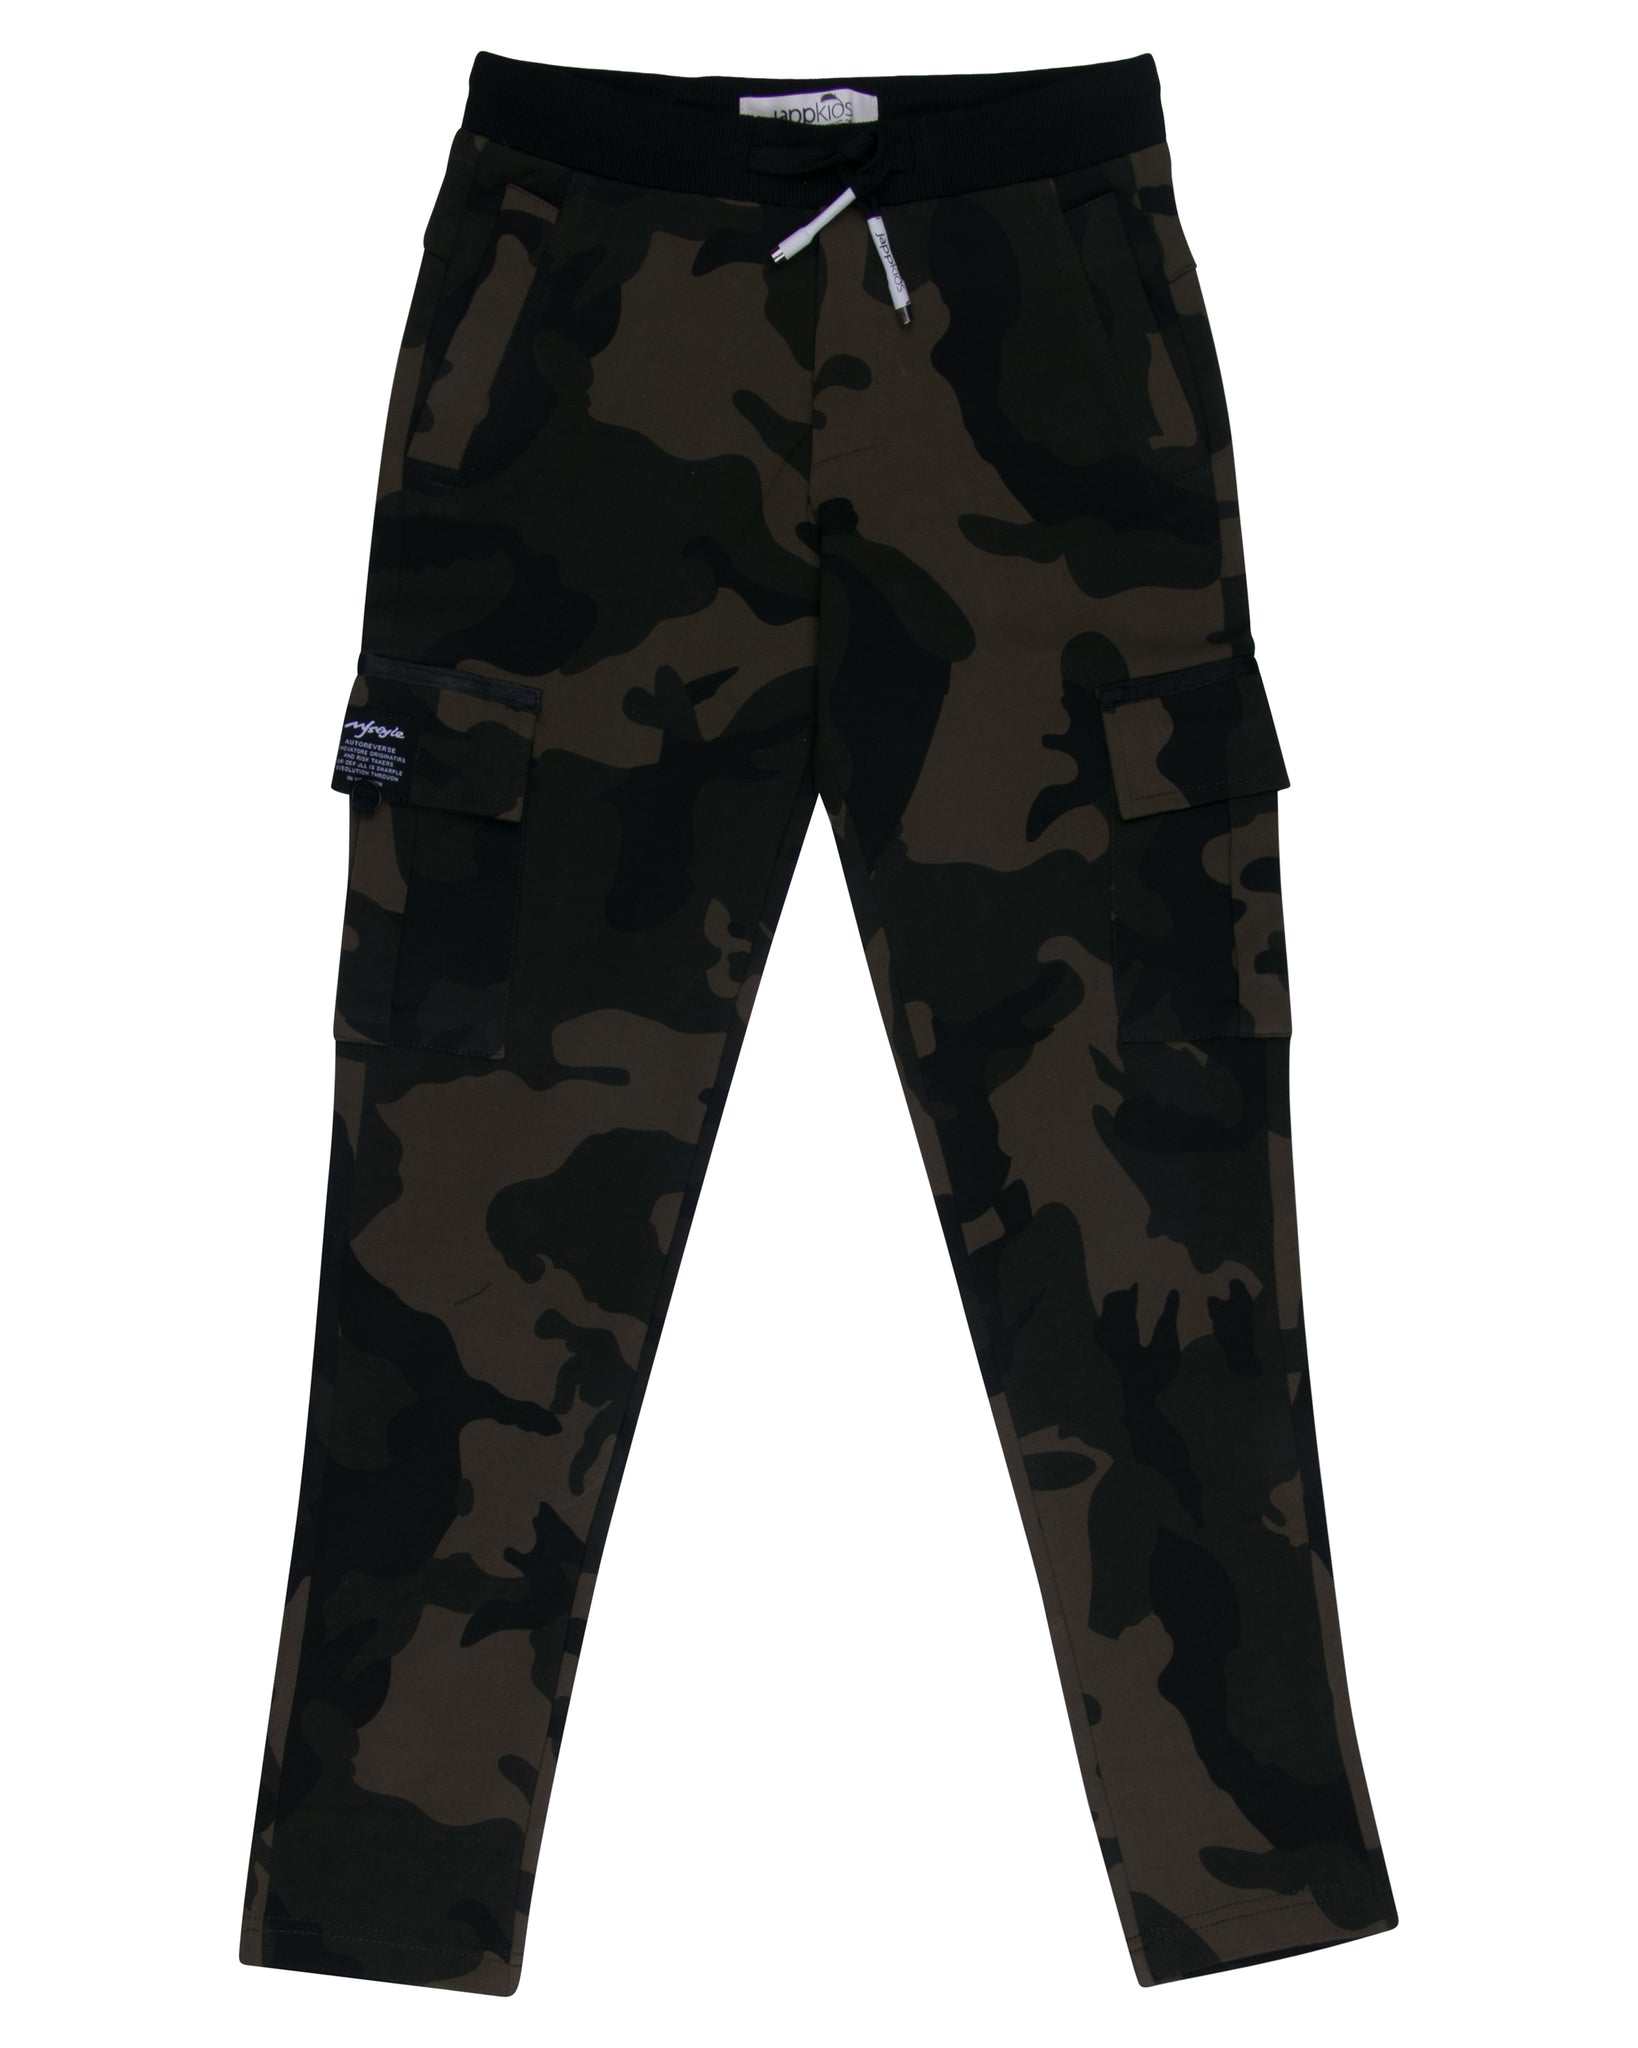 LX PRODUCTS Army Track Pants, Army Joggers for Women, Army Track Lower for  Sports Gym Athletic Training Workout -Green Camouflage Print (Multicolour)  Size(26 to 34)Hip Size : Amazon.in: Clothing & Accessories